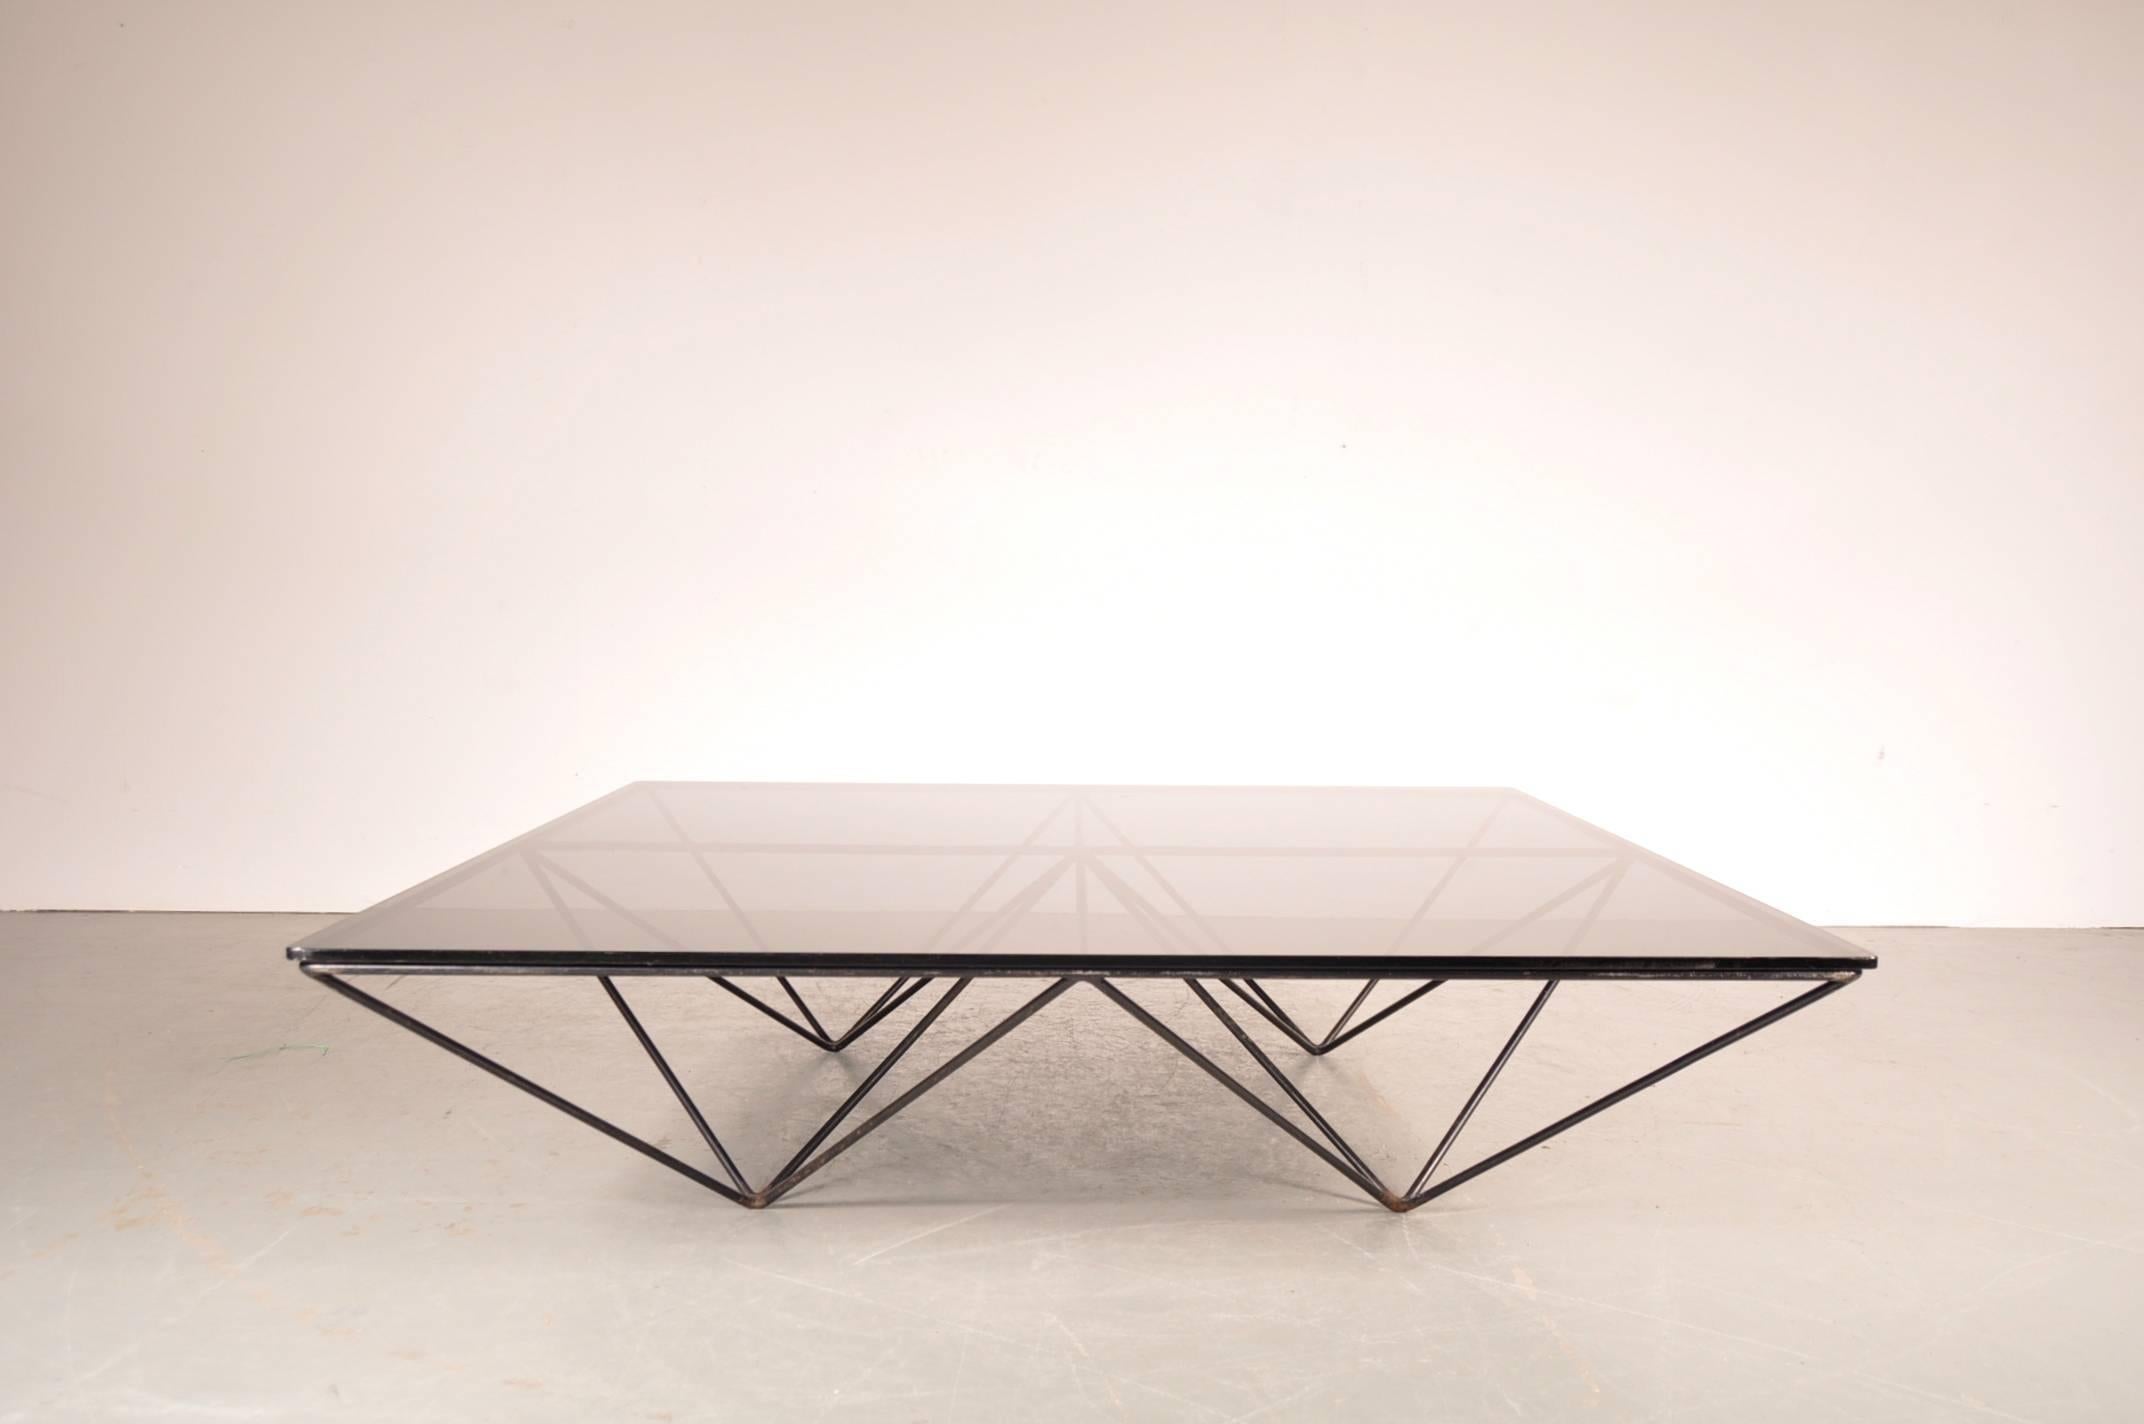 Beautiful coffee table by Paolo Piva, manufactured by B&B, Italia, circa 1980.

This is a rare edition with a smoke glass top. The black lacquered metal base has a geometric design, consisting of four inverted pyramids creating an eye-catching